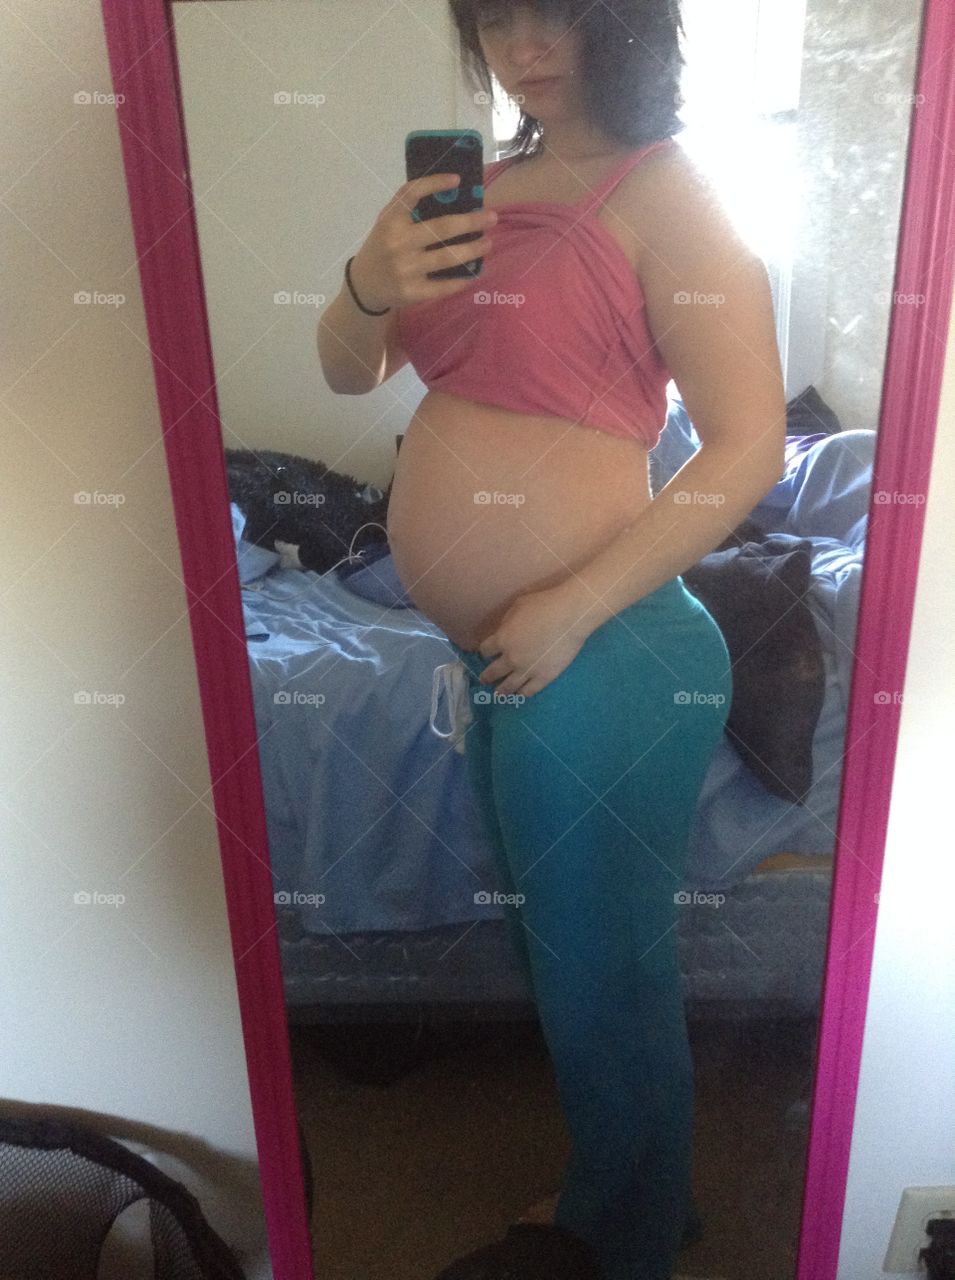 Trying to stay fit while pregnant!